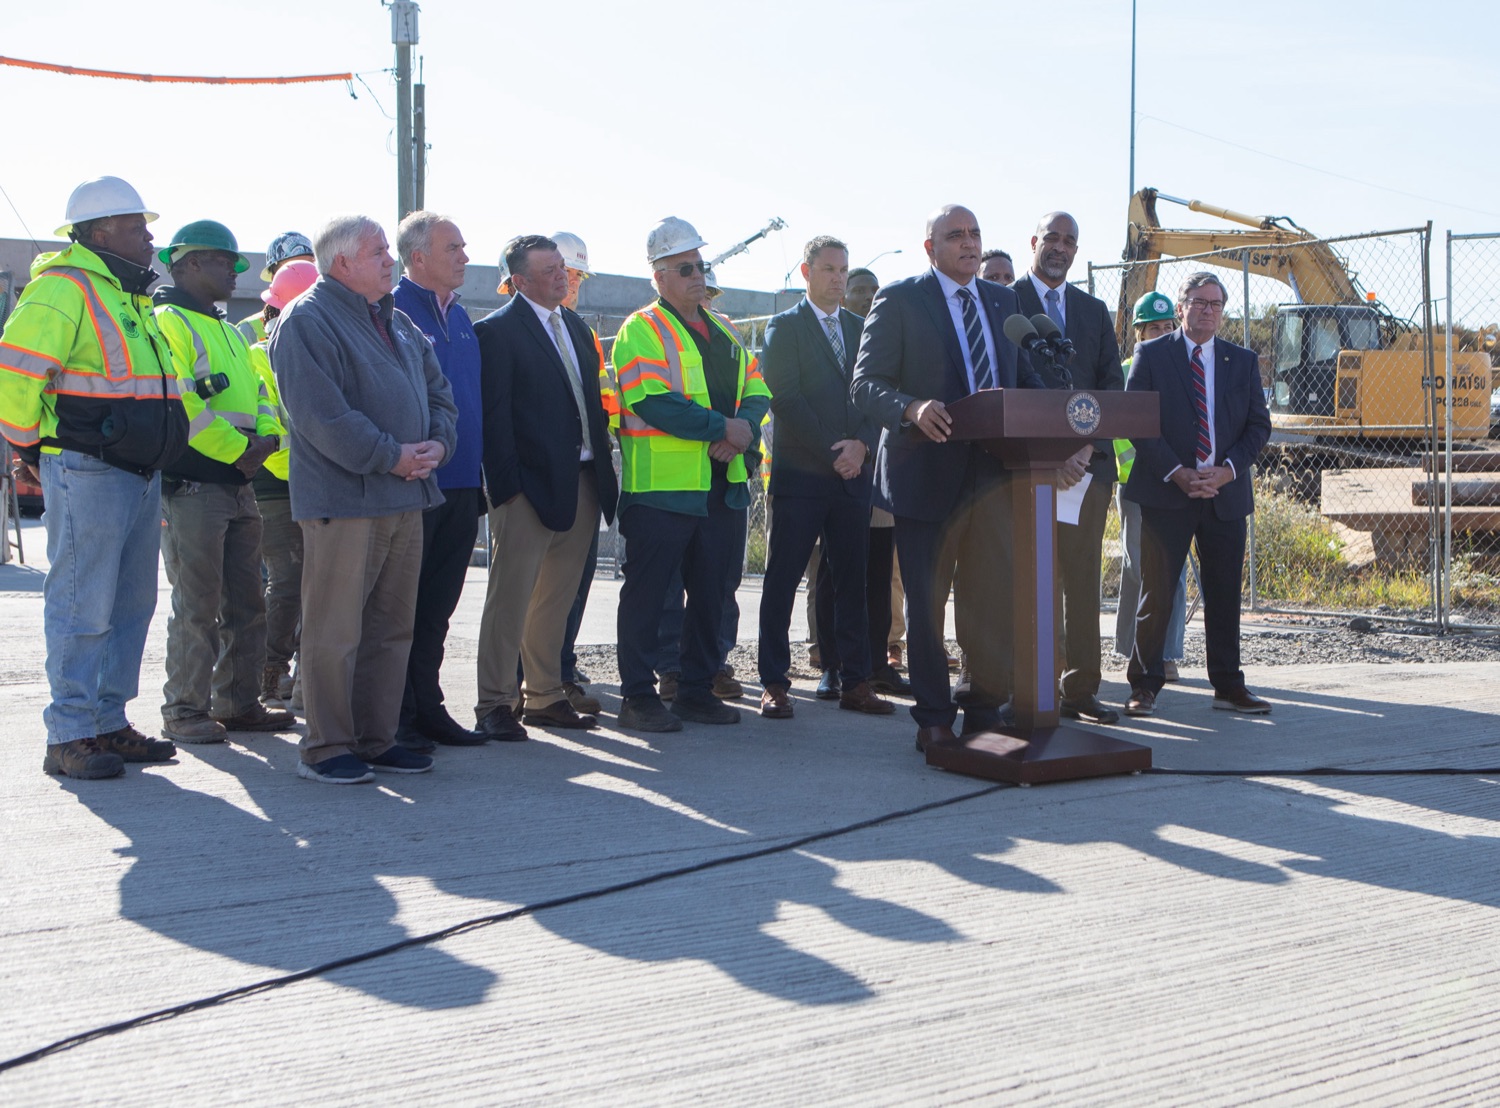 Federal Highway Administrator Shailen Bhatt joined Pennsylvania Department of Transportation (PennDOT) Secretary Mike Carroll and local officials to commemorate the shifting of traffic from the temporary roadway onto the new Interstate 95 in northeast Philadelphia, which will begin on Monday evening. .Governor Shapiro and Secretary Carroll have led a coordinated state, local, and federal response to reopen the roadway safely and as quickly as possible, and efforts have been ahead of schedule each step of the way to get traffic flowing on I-95 again. A temporary roadway with six lanes of traffic opened on June 23, only 12 days after the initial fire and collapse..<br><a href="https://filesource.amperwave.net/commonwealthofpa/photo/24009_PennDOT_I95Switch_ERD_013.jpg" target="_blank">⇣ Download Photo</a>